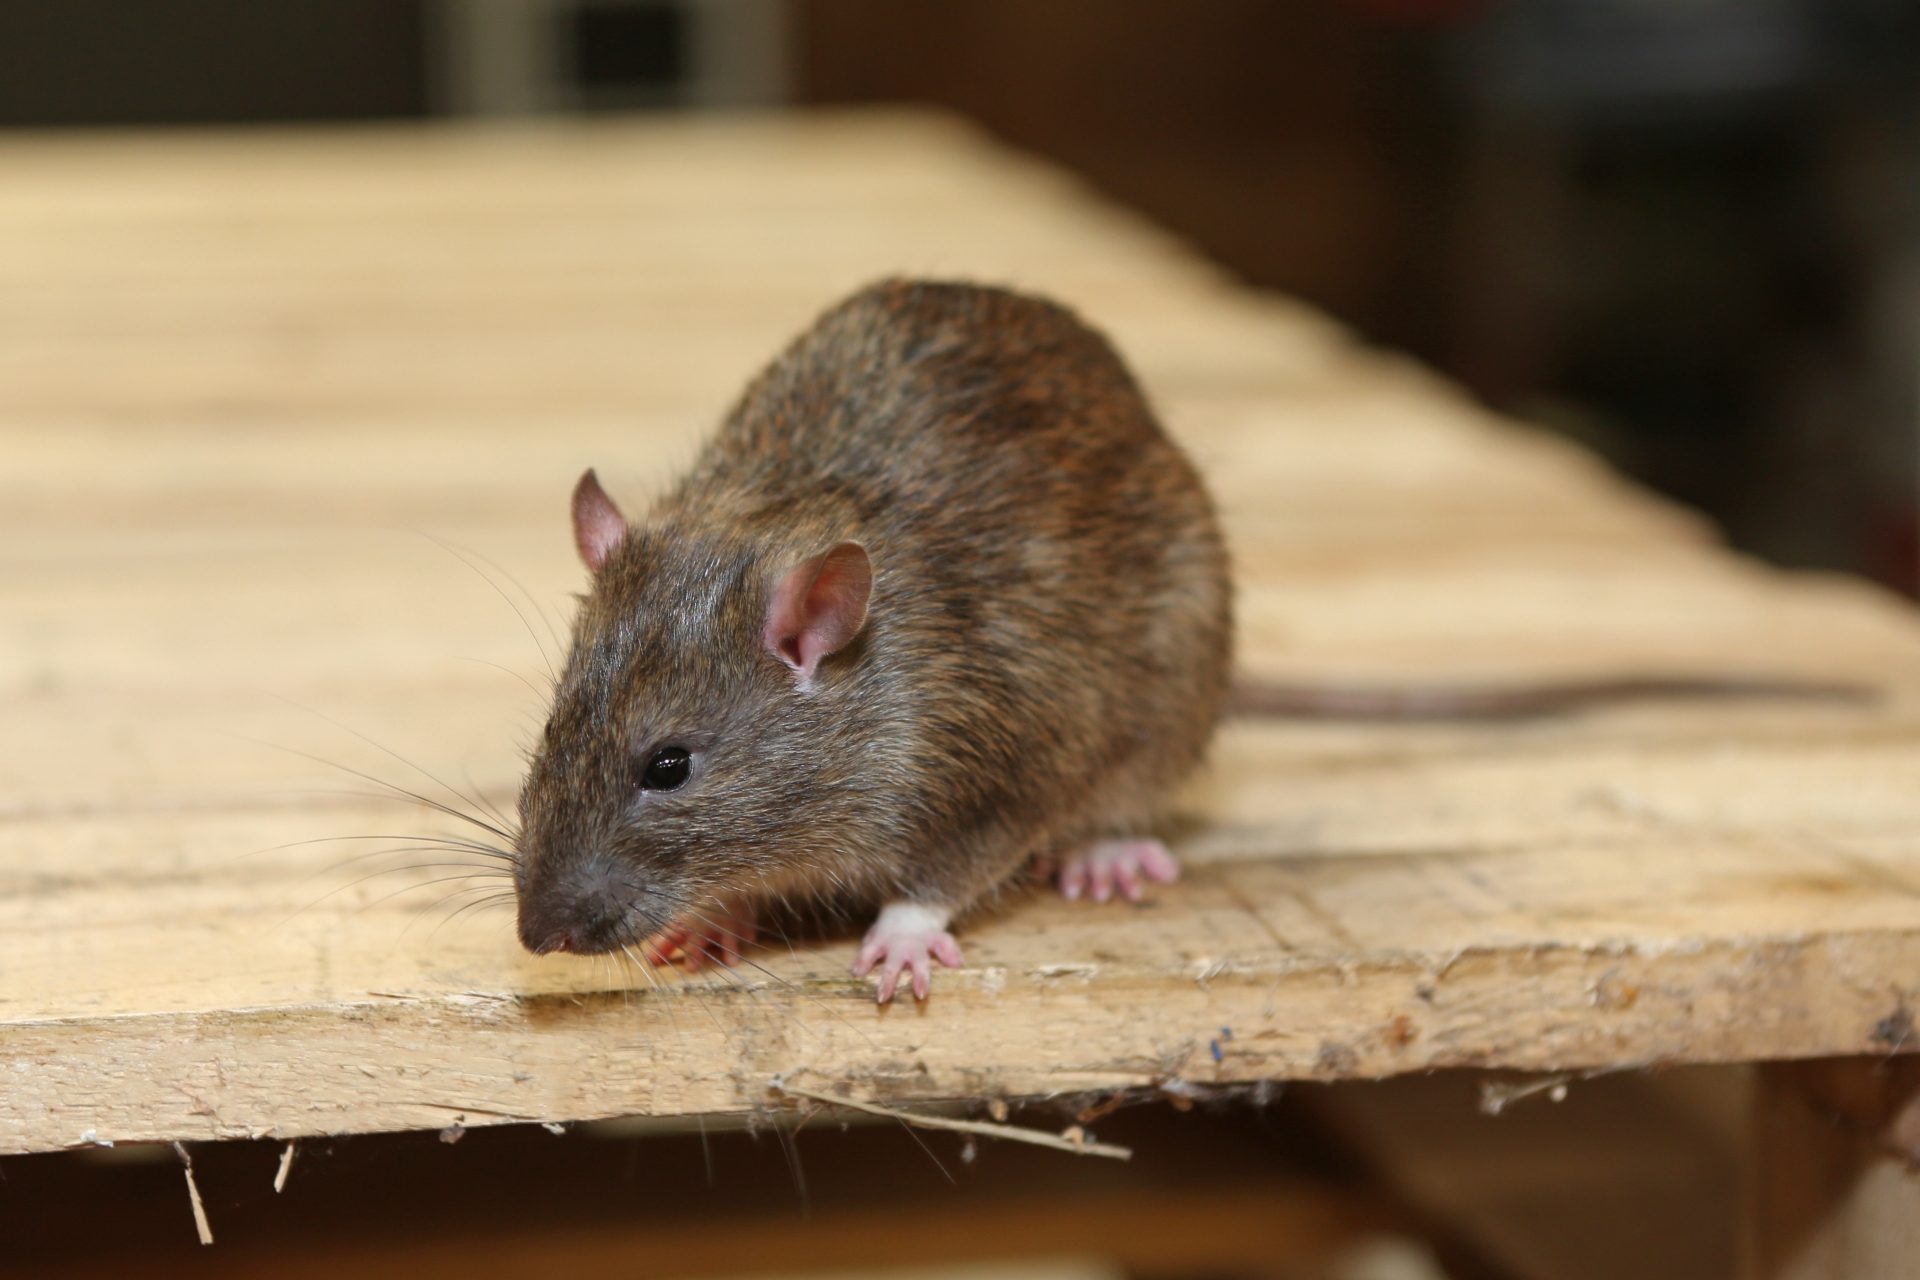 Rat Control, Pest Control in Stanmore, Queensbury, HA7. Call Now 020 8166 9746